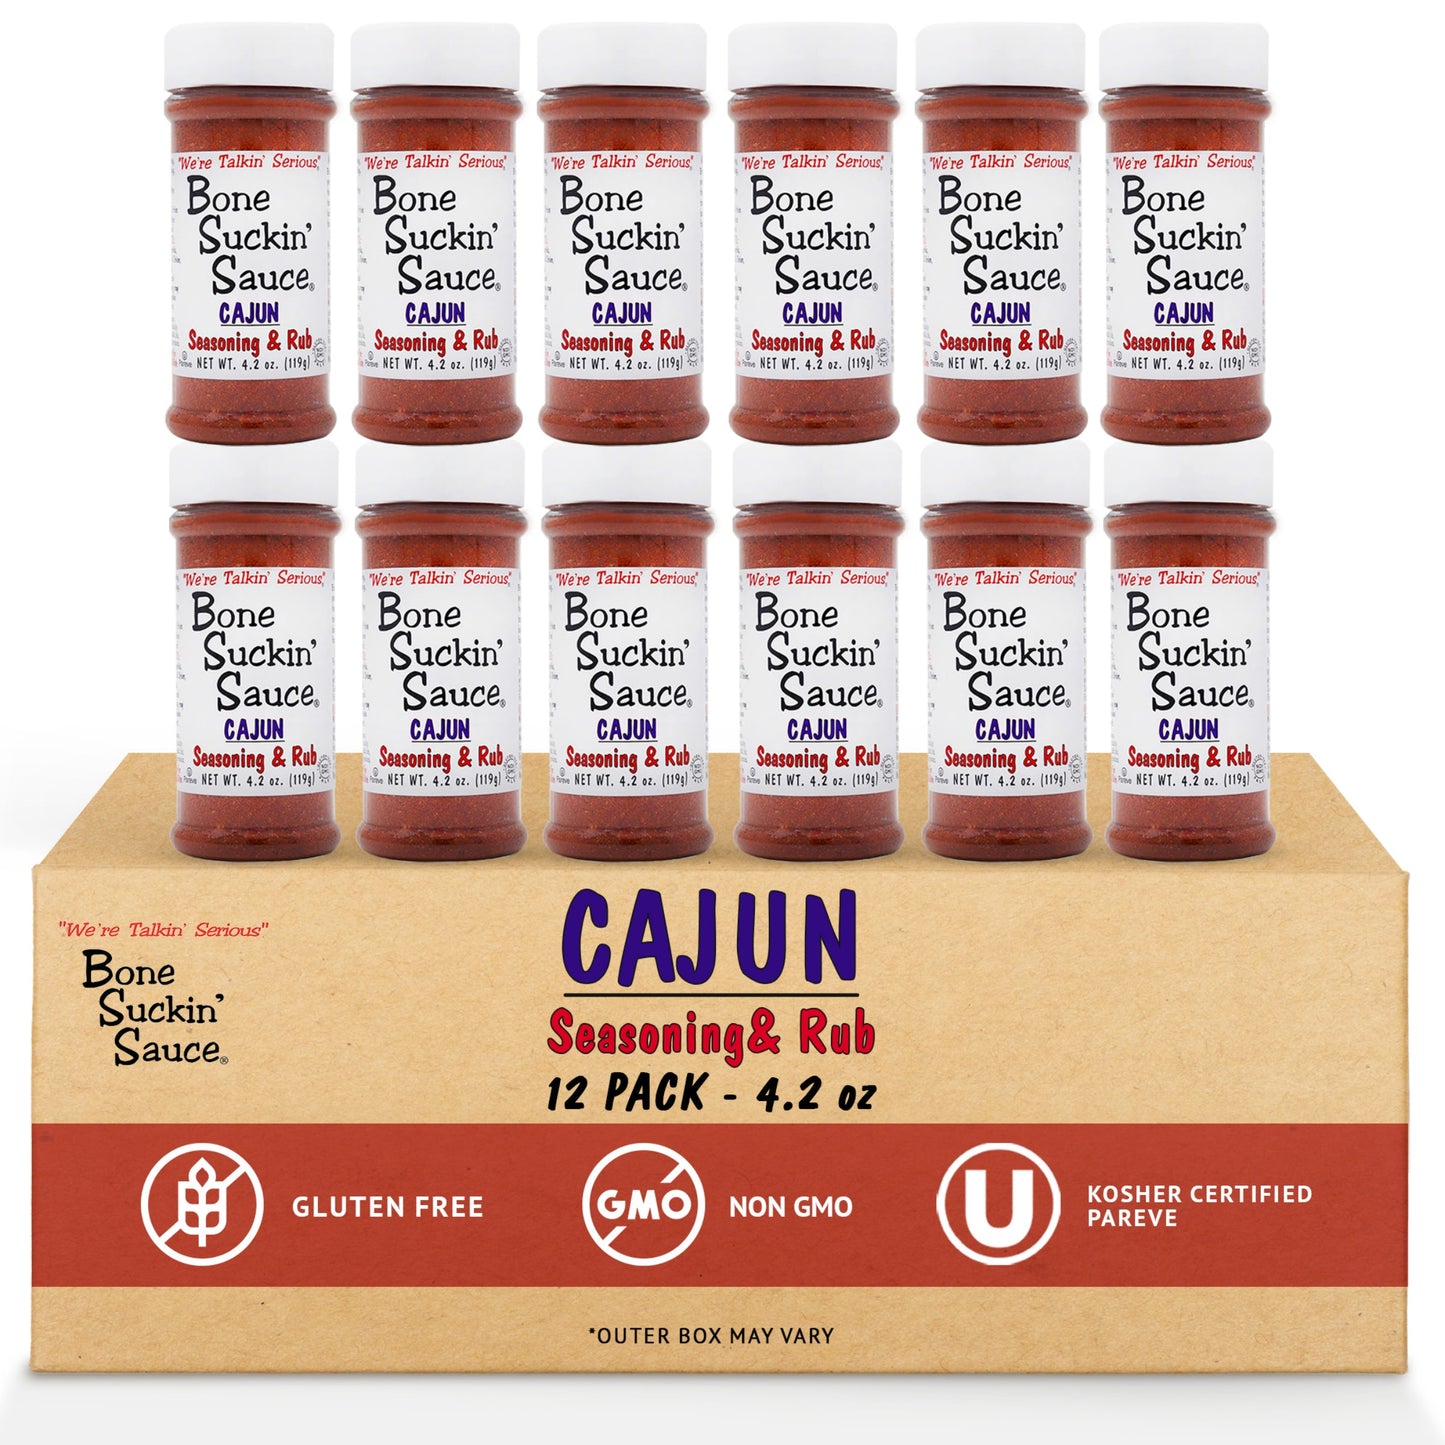 Bone Suckin'® Cajun Seasoning & Rub, 4.2 oz., is the perfect blend of Cajun spices & herbs along with the right amount of heat. It makes your food taste great, gets friends talking & coming back for more! Use generously & your Cajun food will be "Bone Suckin'® Good!" Use On Seafood, Poultry, Steaks, Pork, Pasta, French Fries, Rice, Vegetables, Gumbos, Jambalayas & more! 12 pack